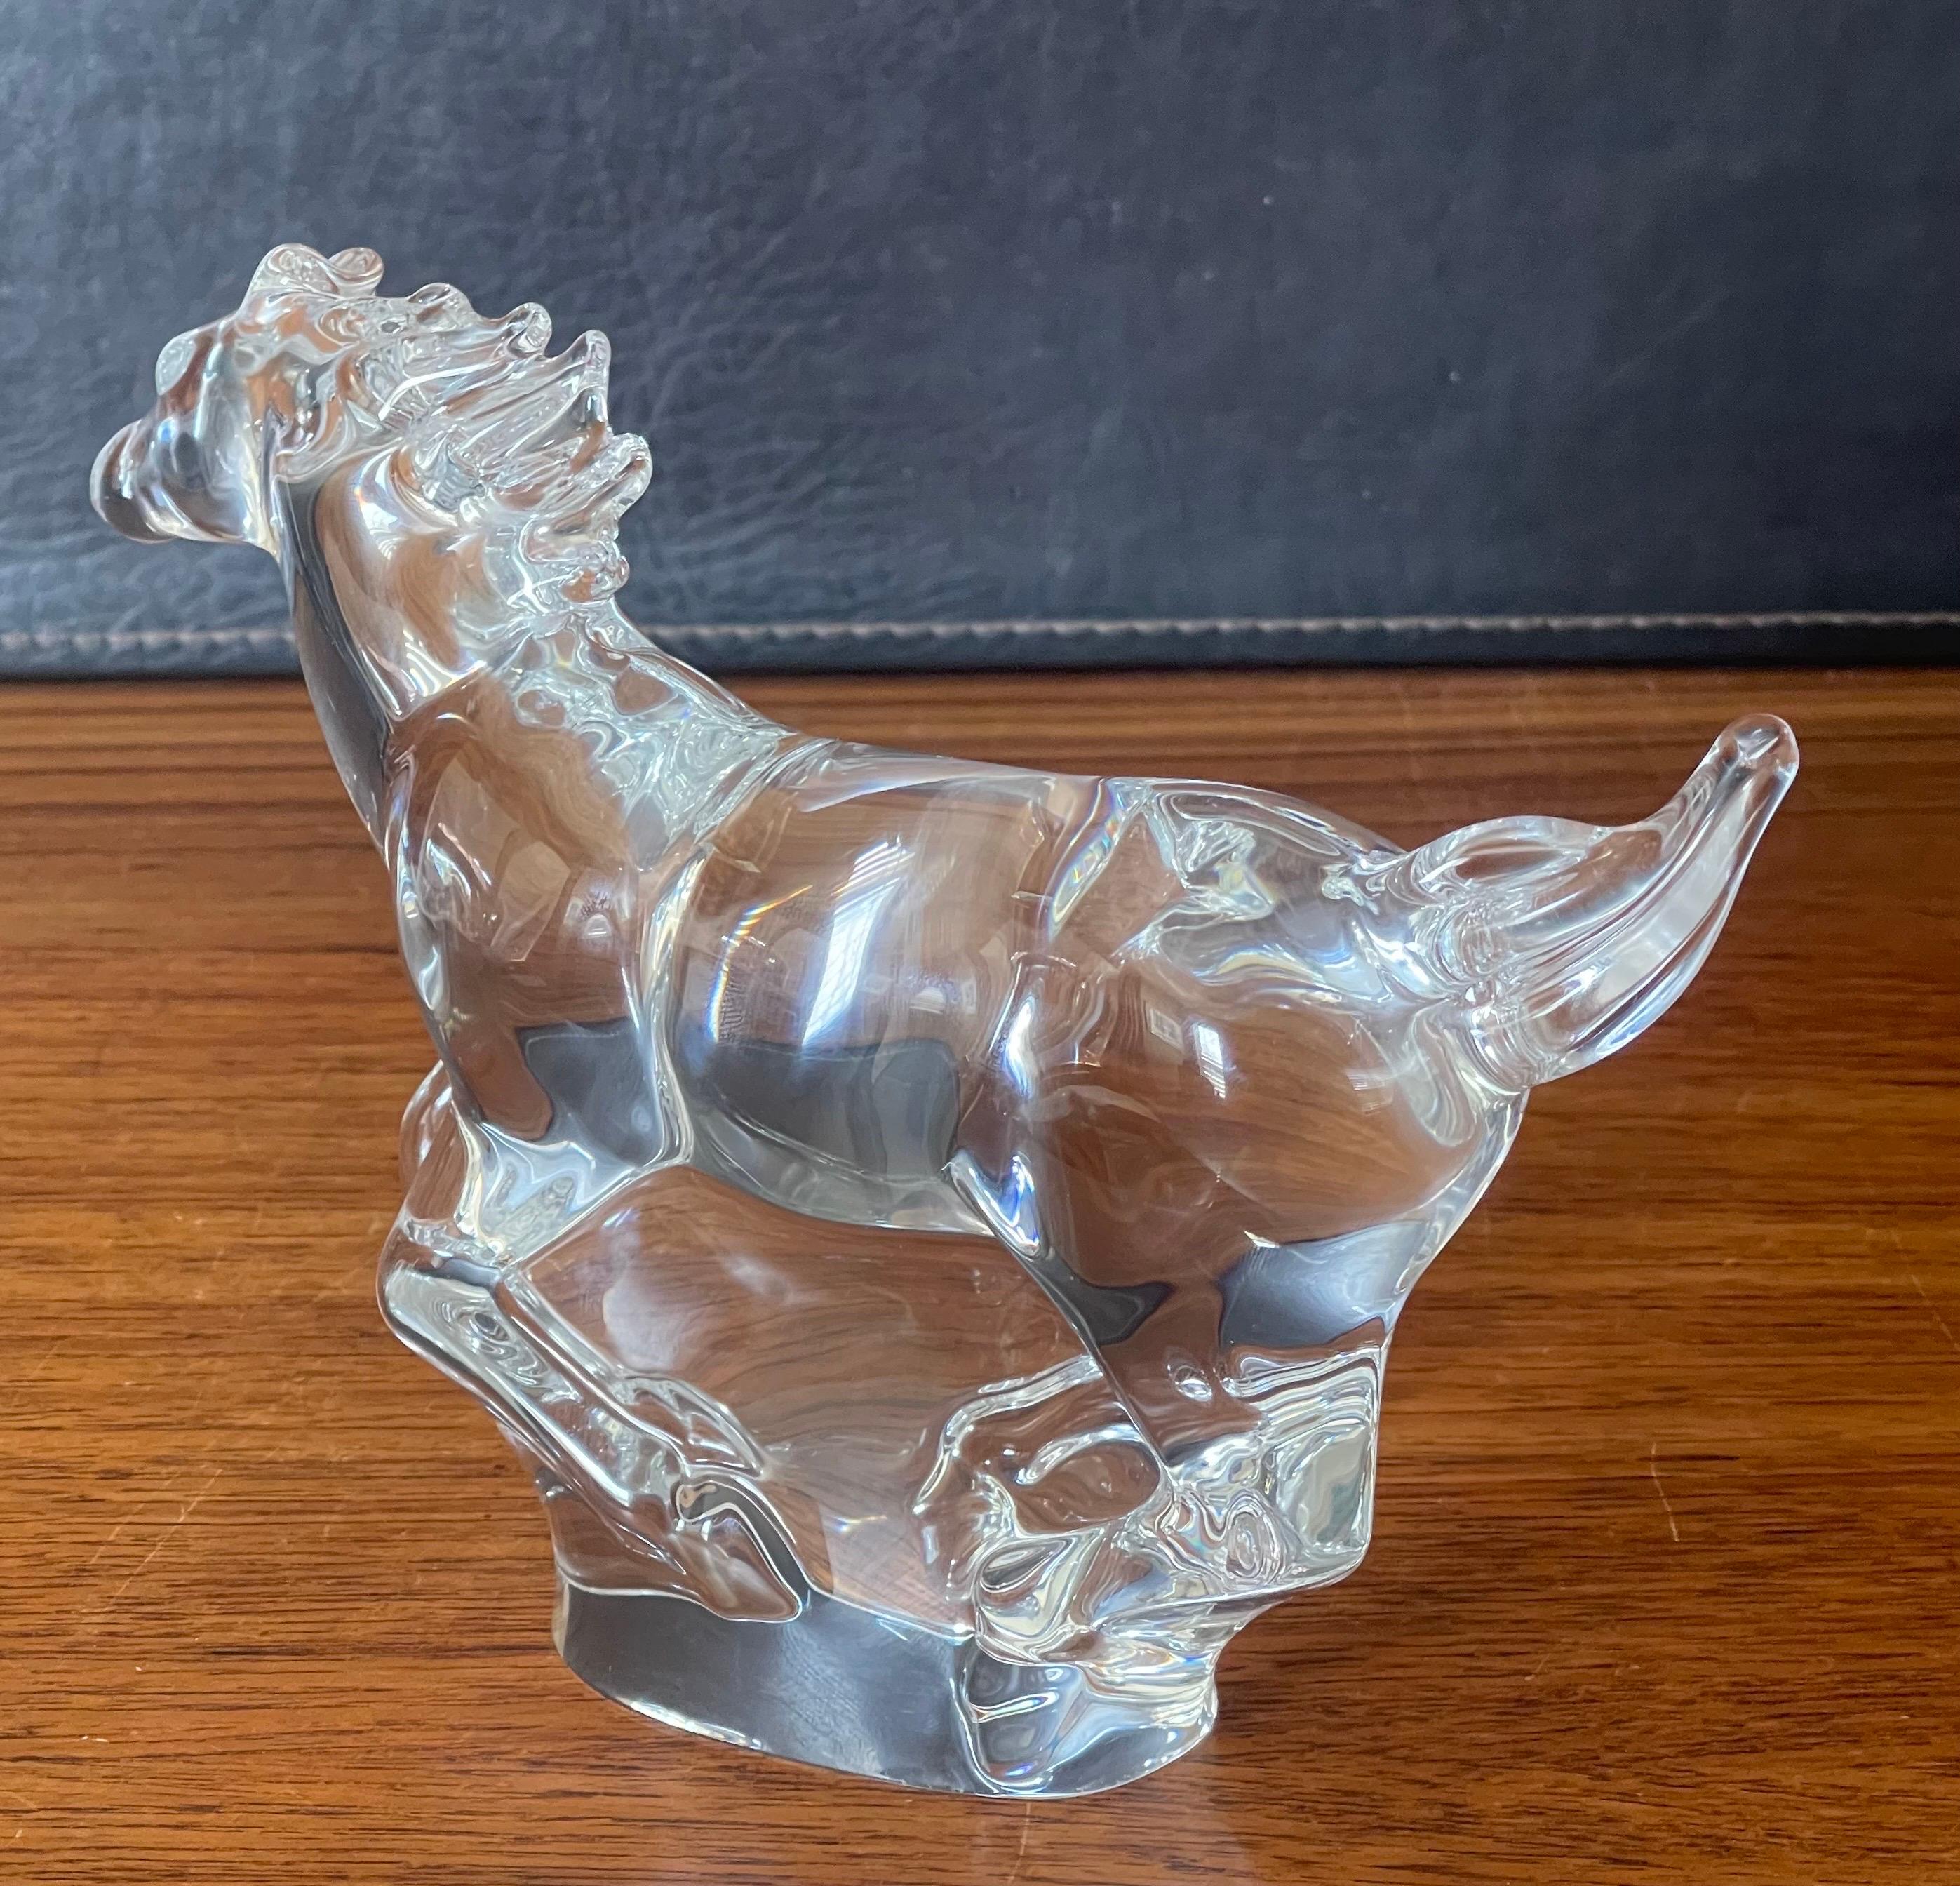 Crystal Galloping Horse / Mustang Sculpture by Steuben Glassworks For Sale 2